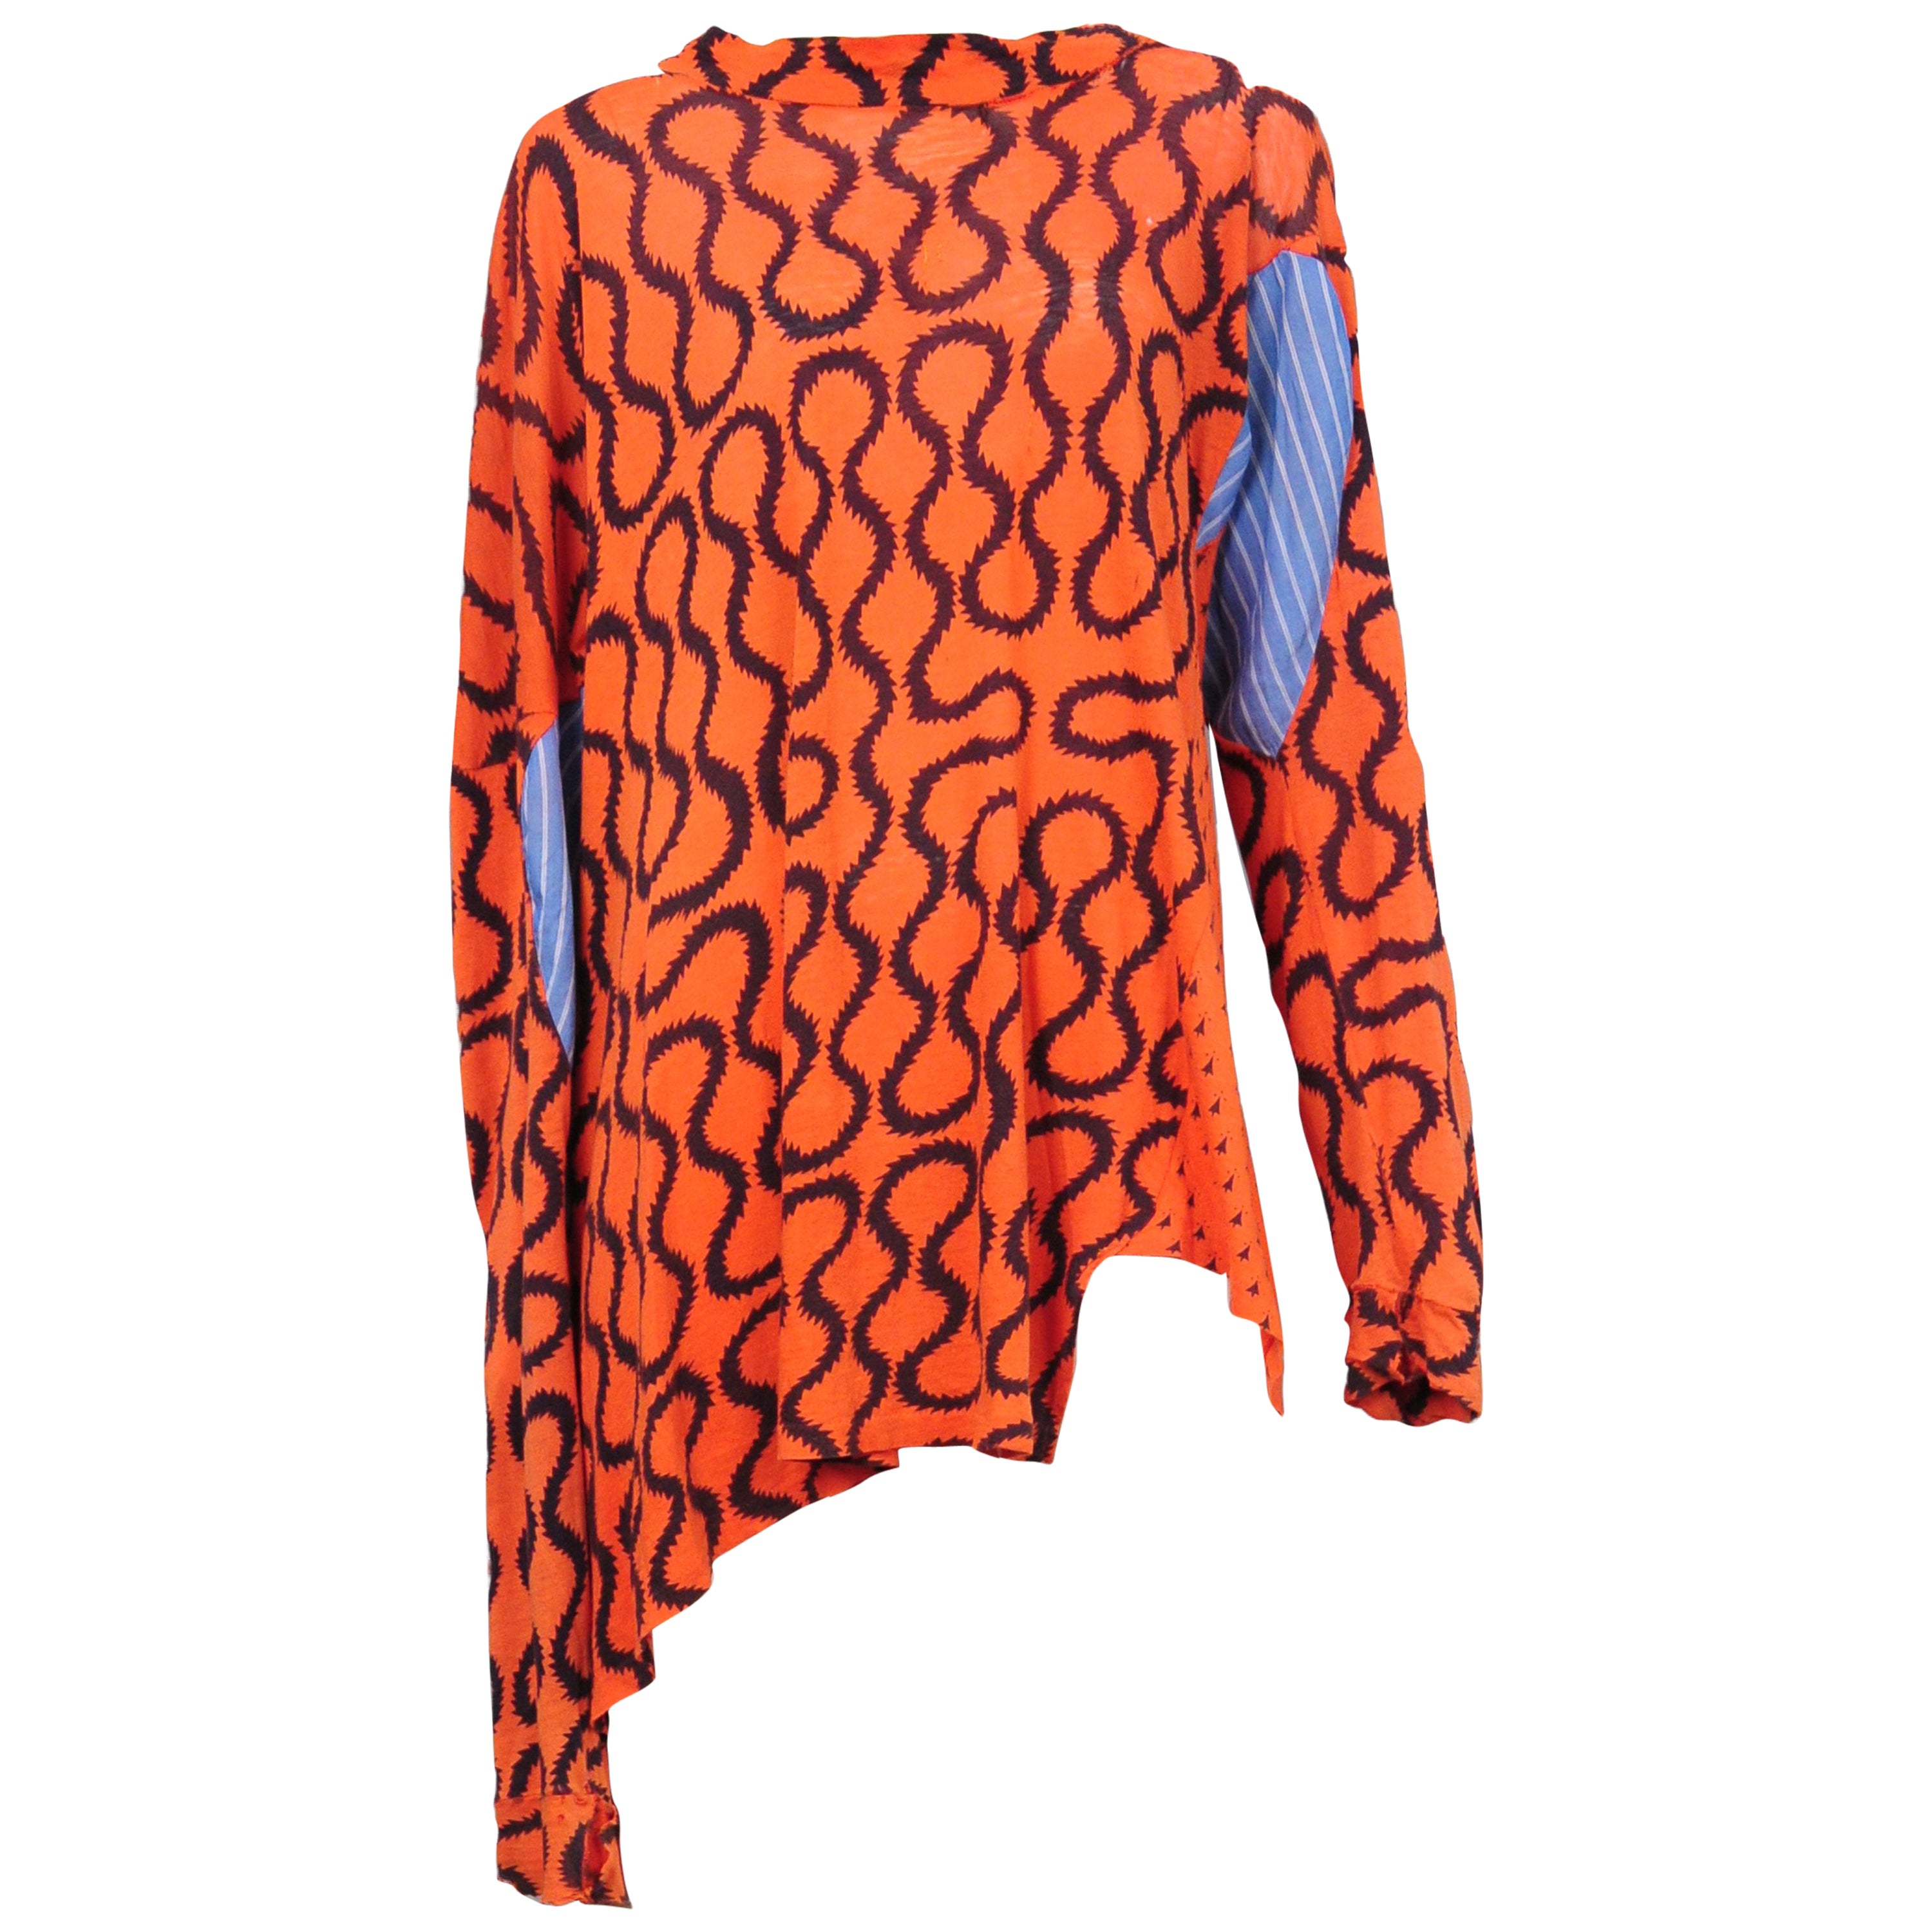 Vivienne Westwood Squiggle - 2 For Sale on 1stDibs | vivienne westwood  squiggle top